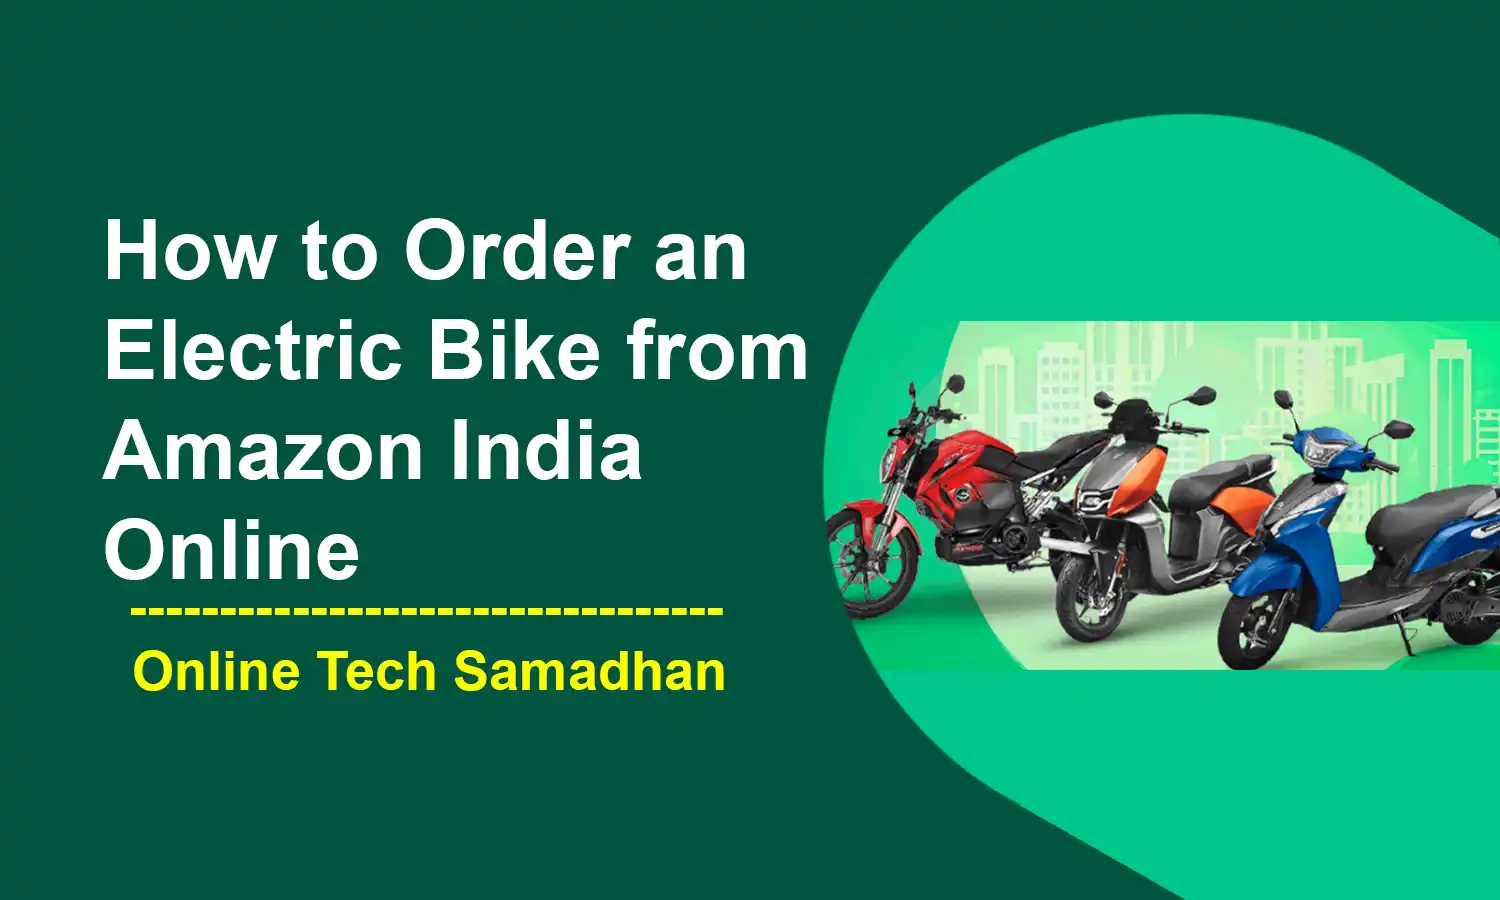 How to Order an Electric Bike from Amazon India Online